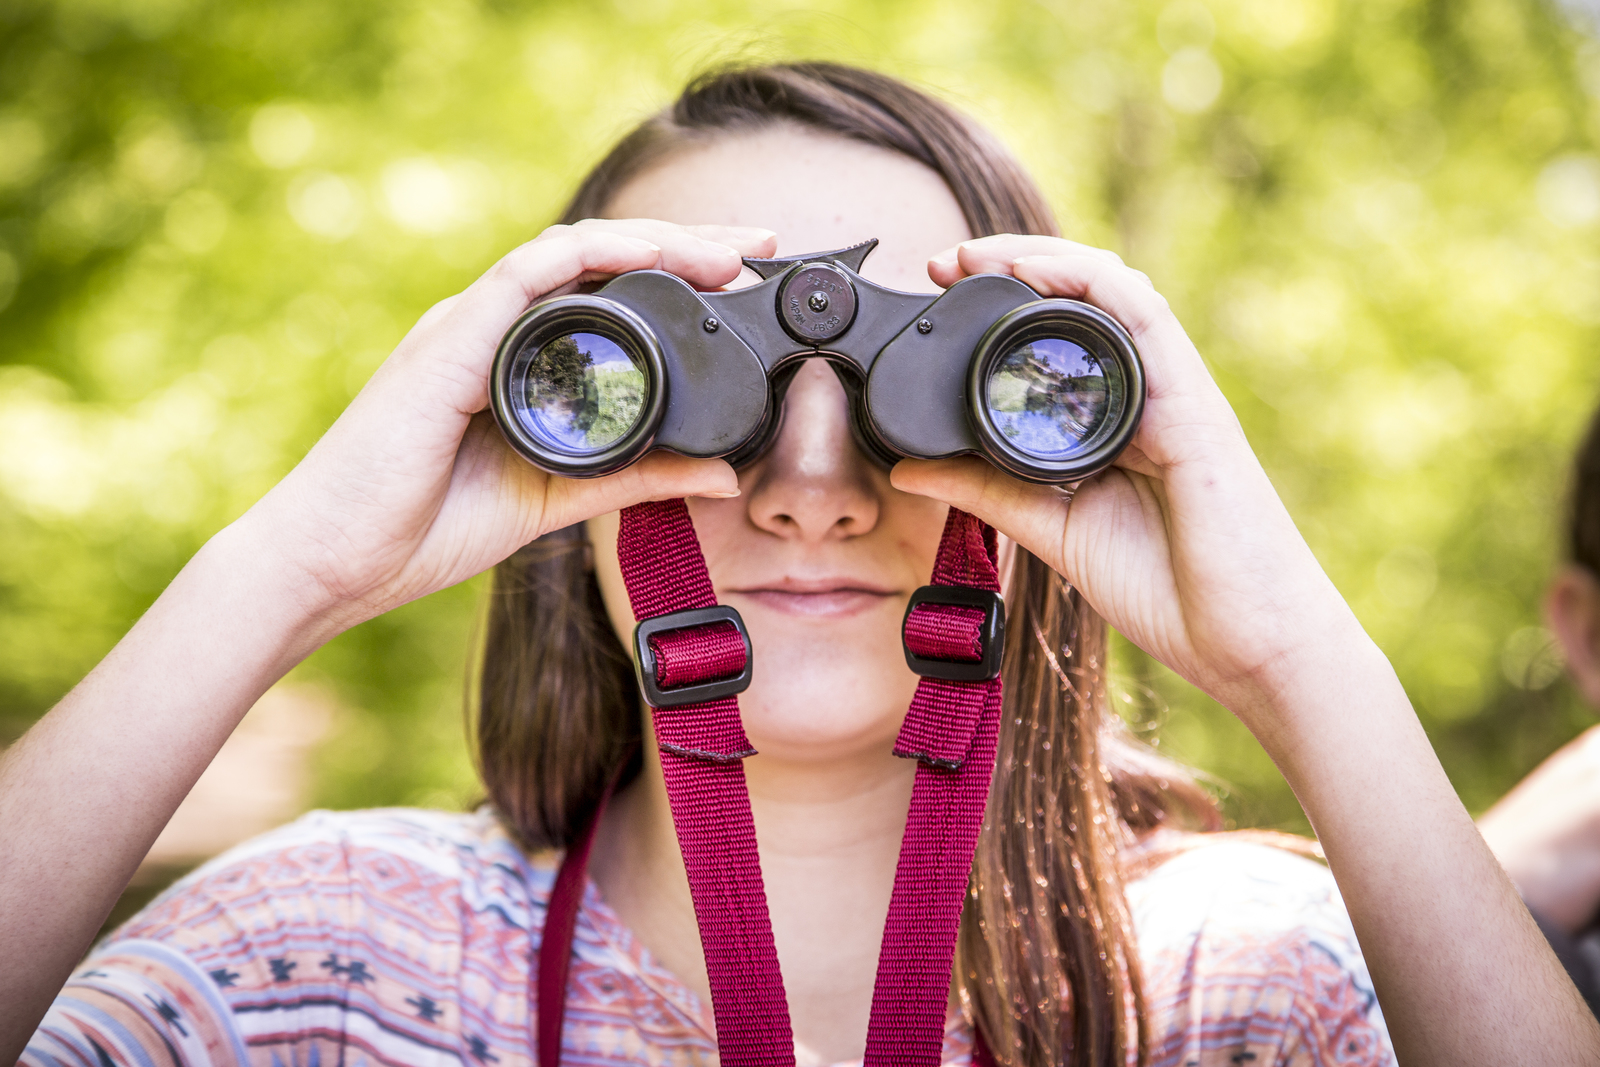 A young girl looks through binoculars directly at the camera.